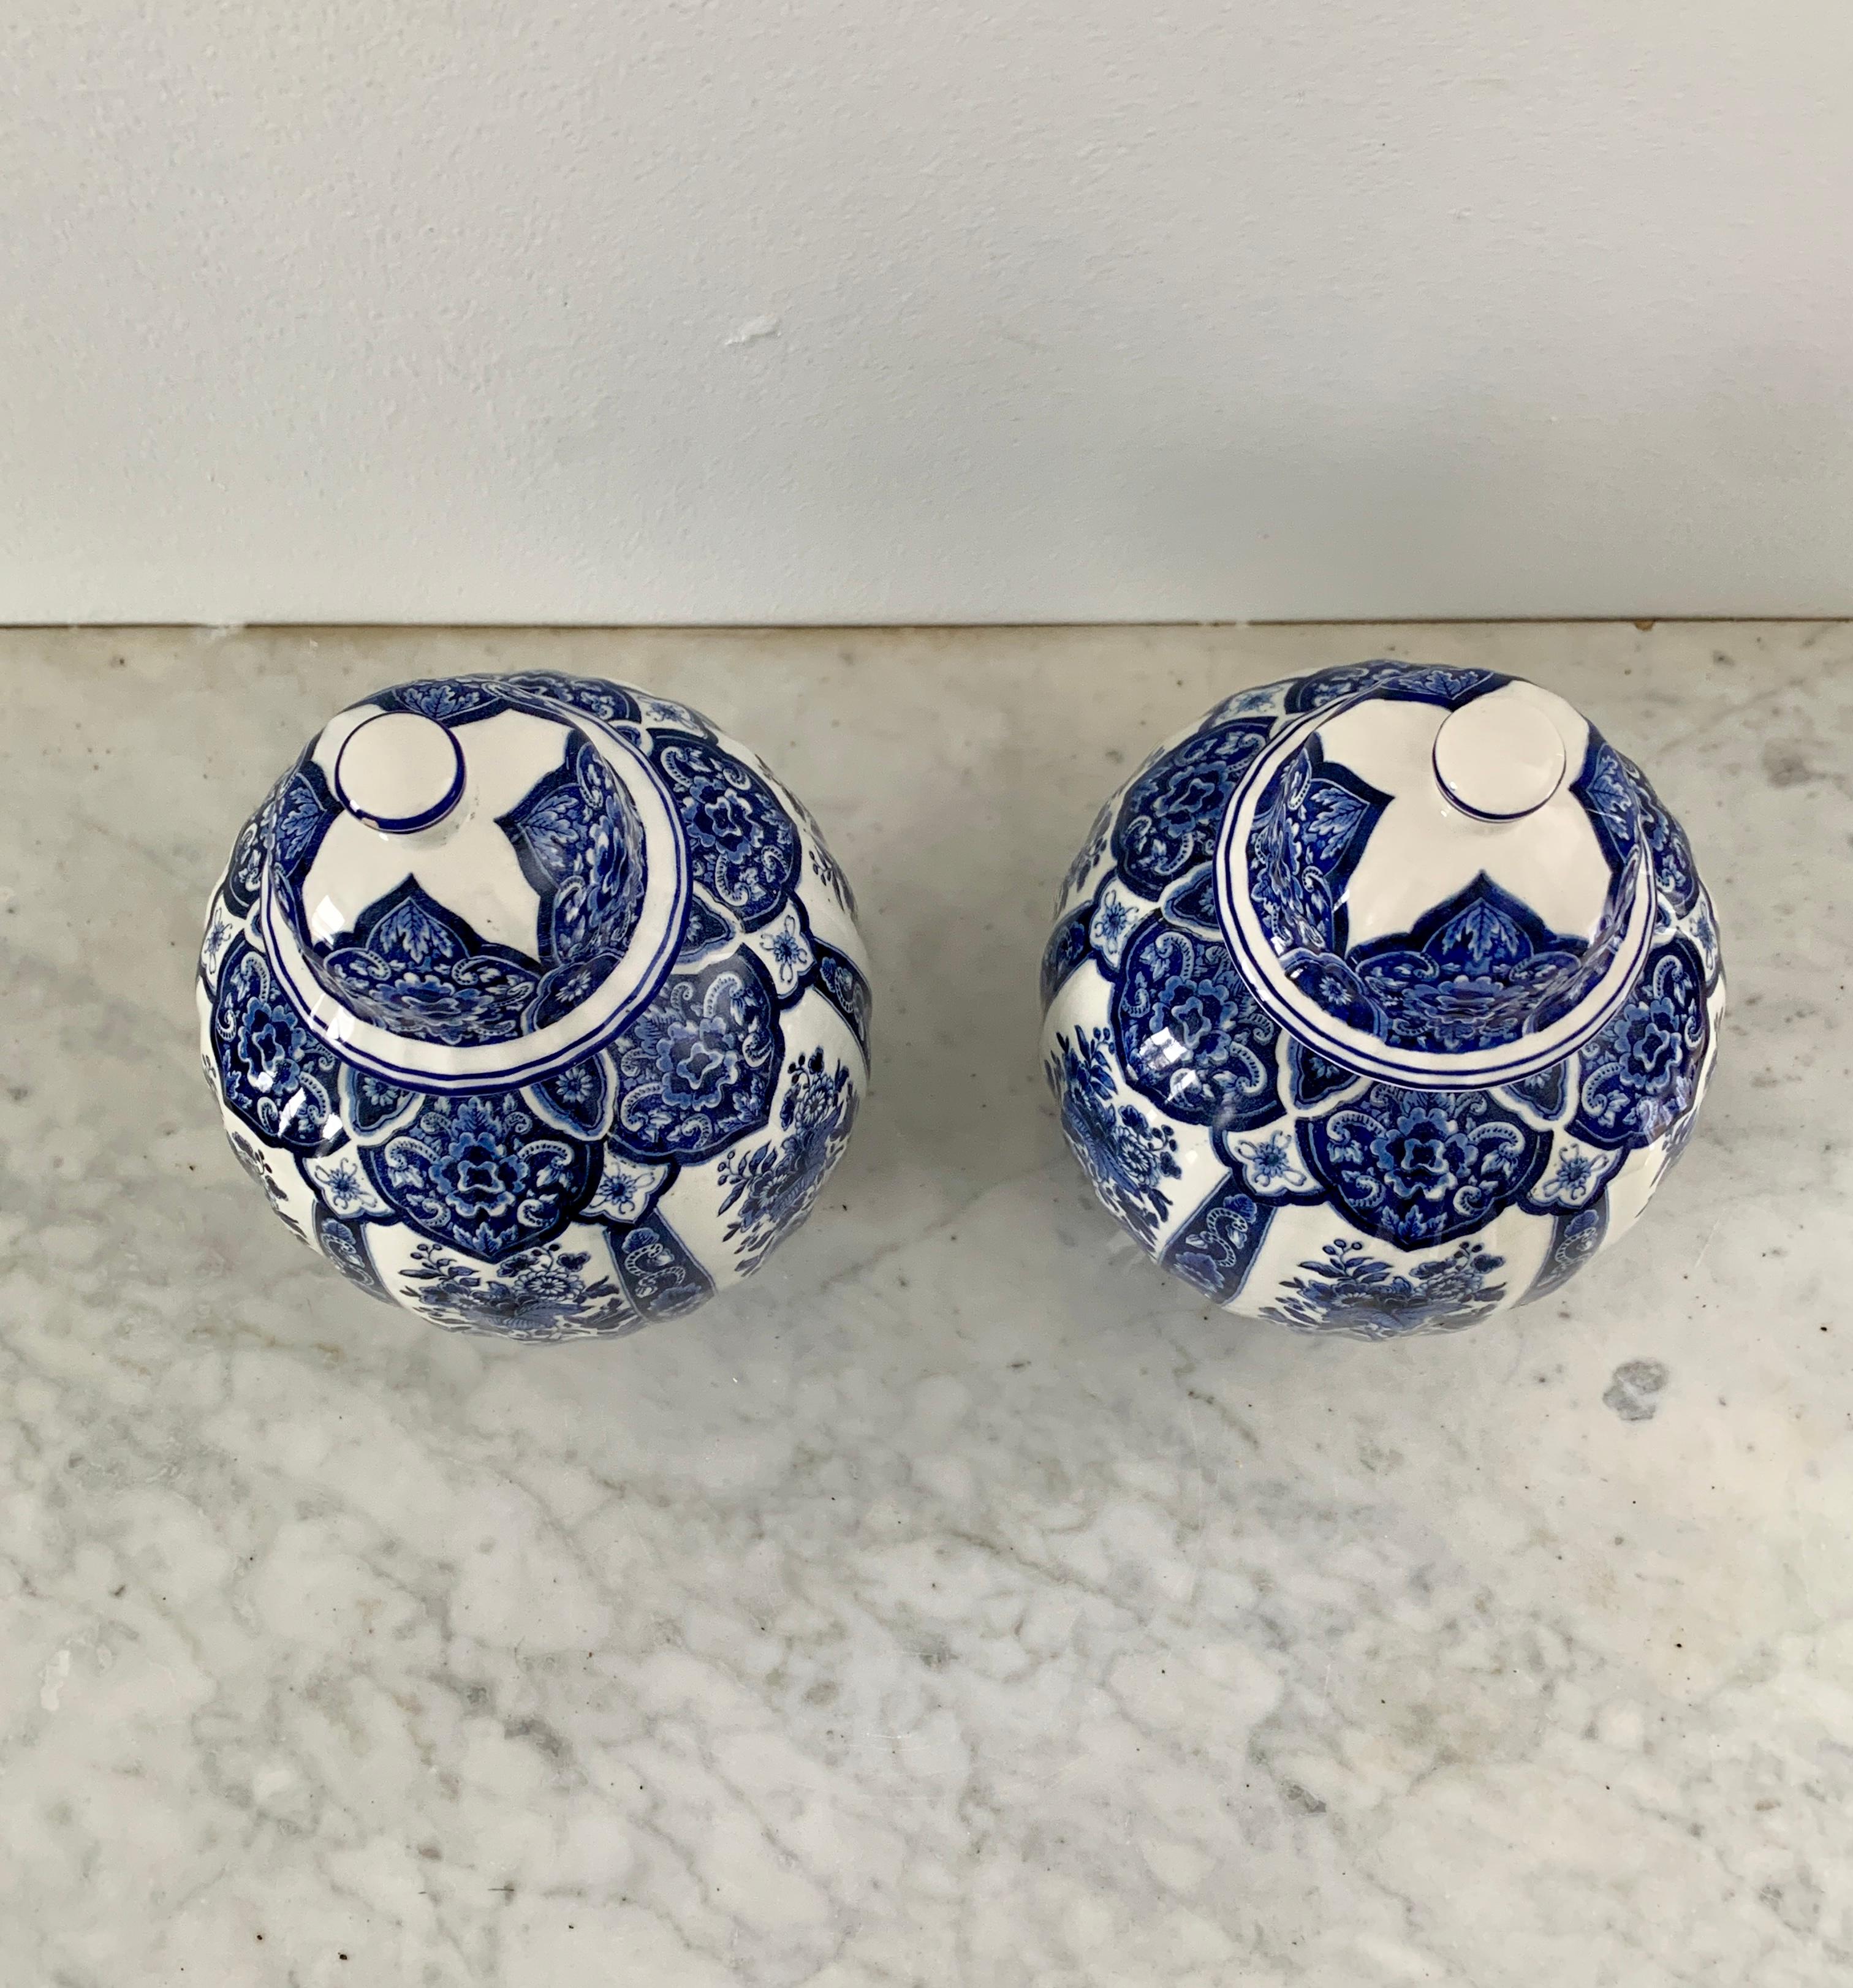 A pair of beautiful Italian blue and white porcelain covered ginger jars or temple jars.

By Ardalt Blue Delfia

Italy, Mid-20th Century

Measures: 5.25